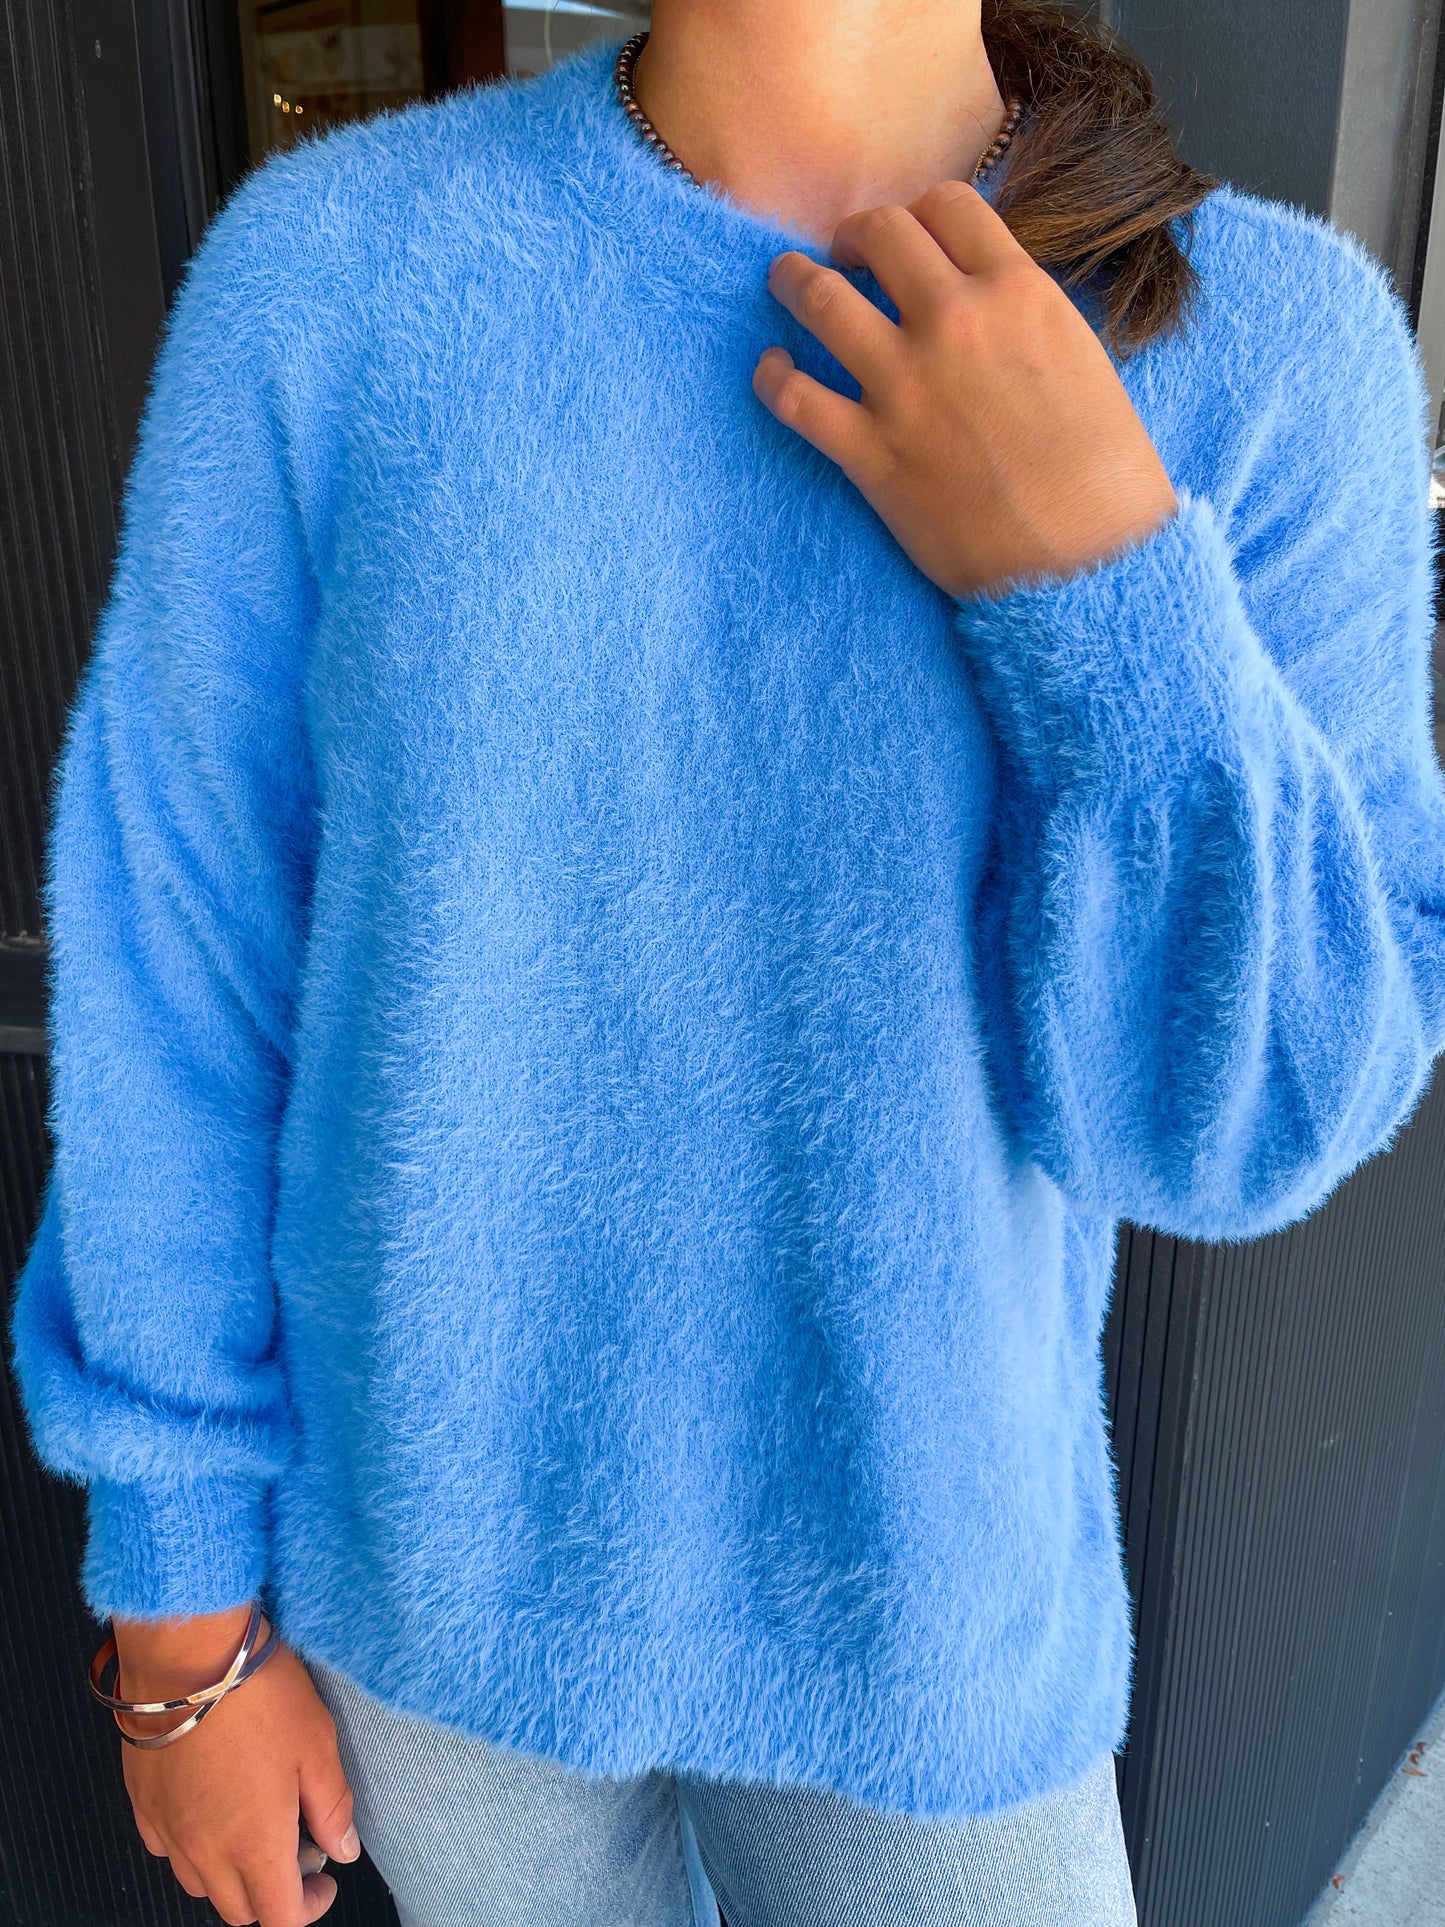 Electric Blue Mohair Sweater